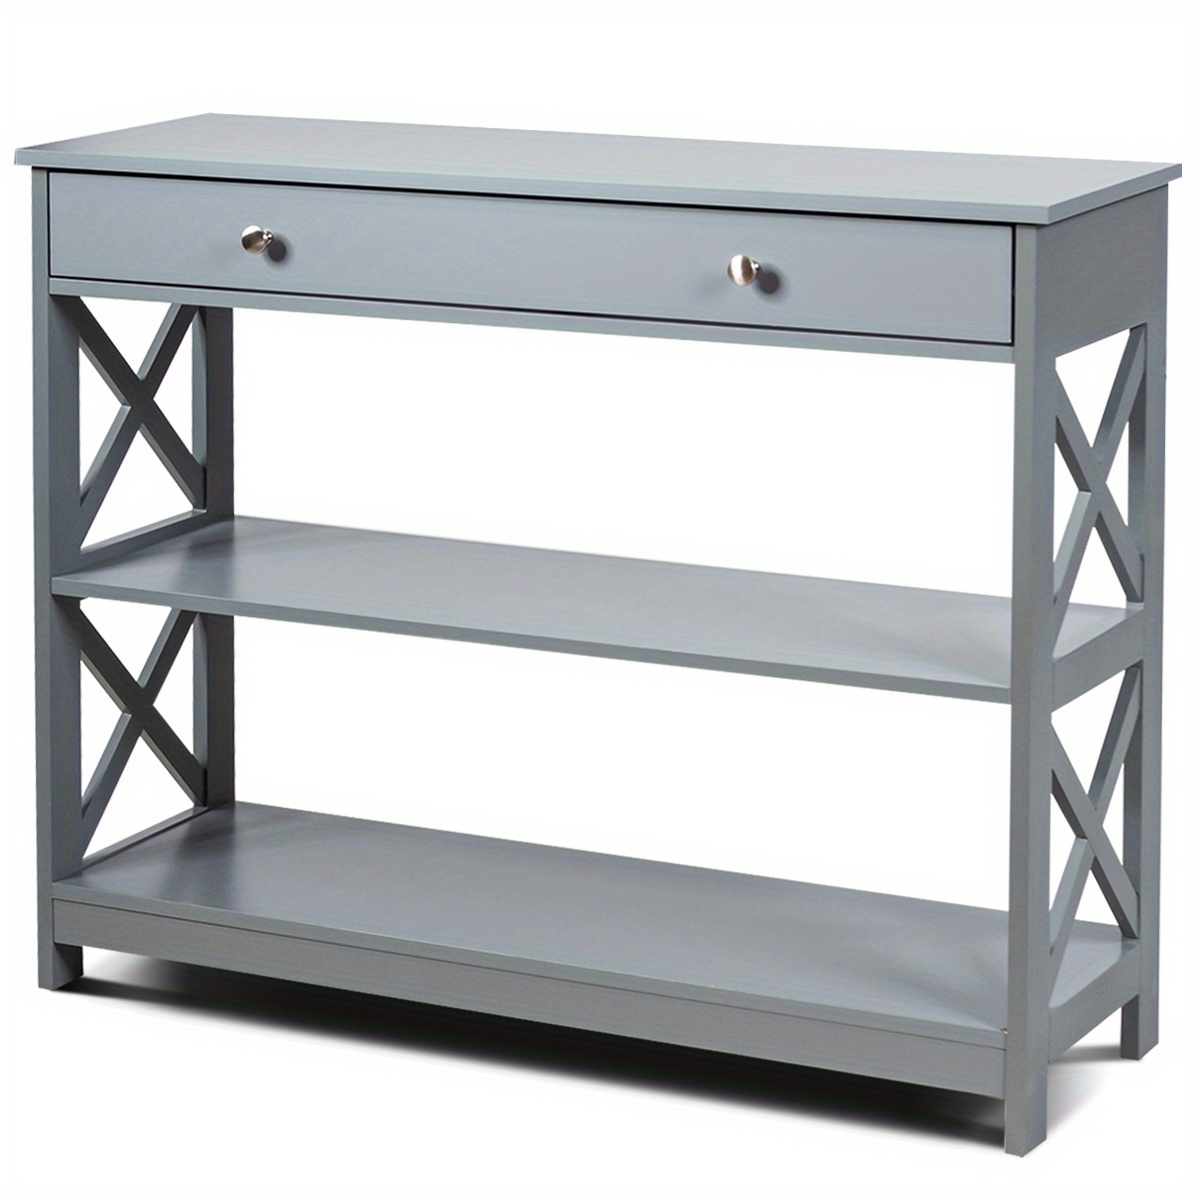 

Lifezeal 3-tier Console Table X-design Sofa Entryway Table With Drawer & Shelves Gray